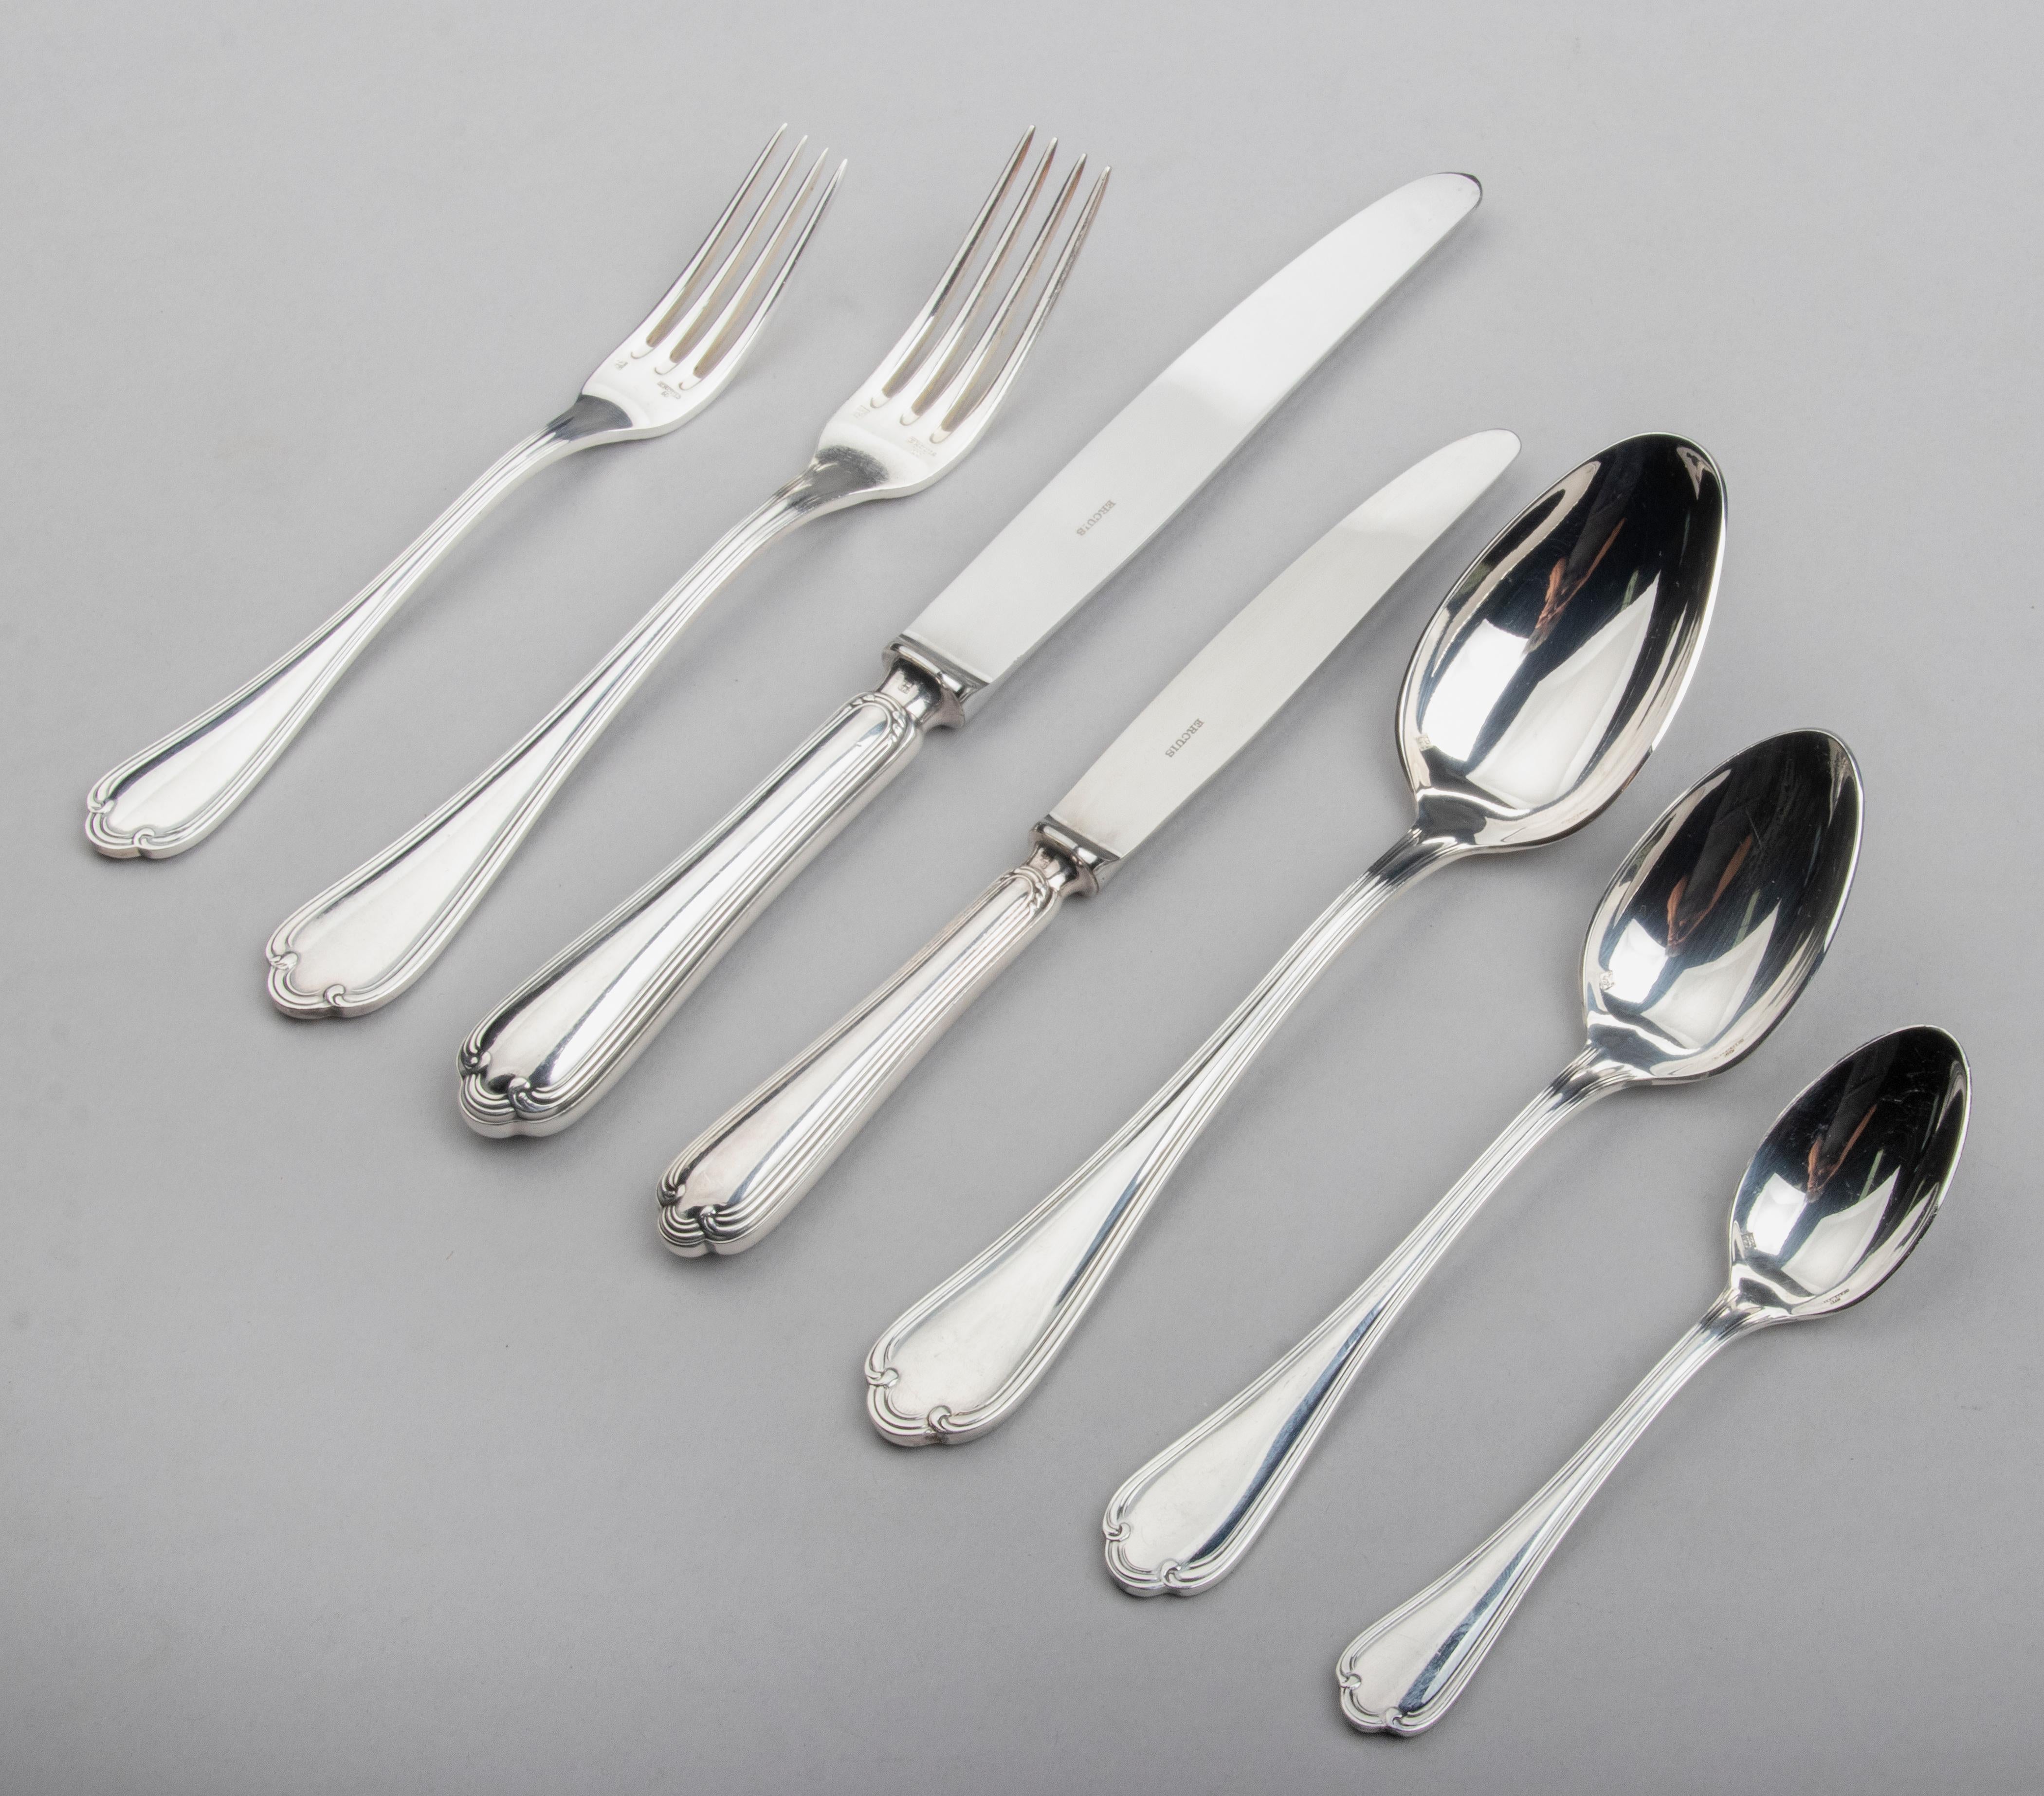 86-Piece Set of Silver Plated Flatware for 12 Persons Made by Ercuis France 10